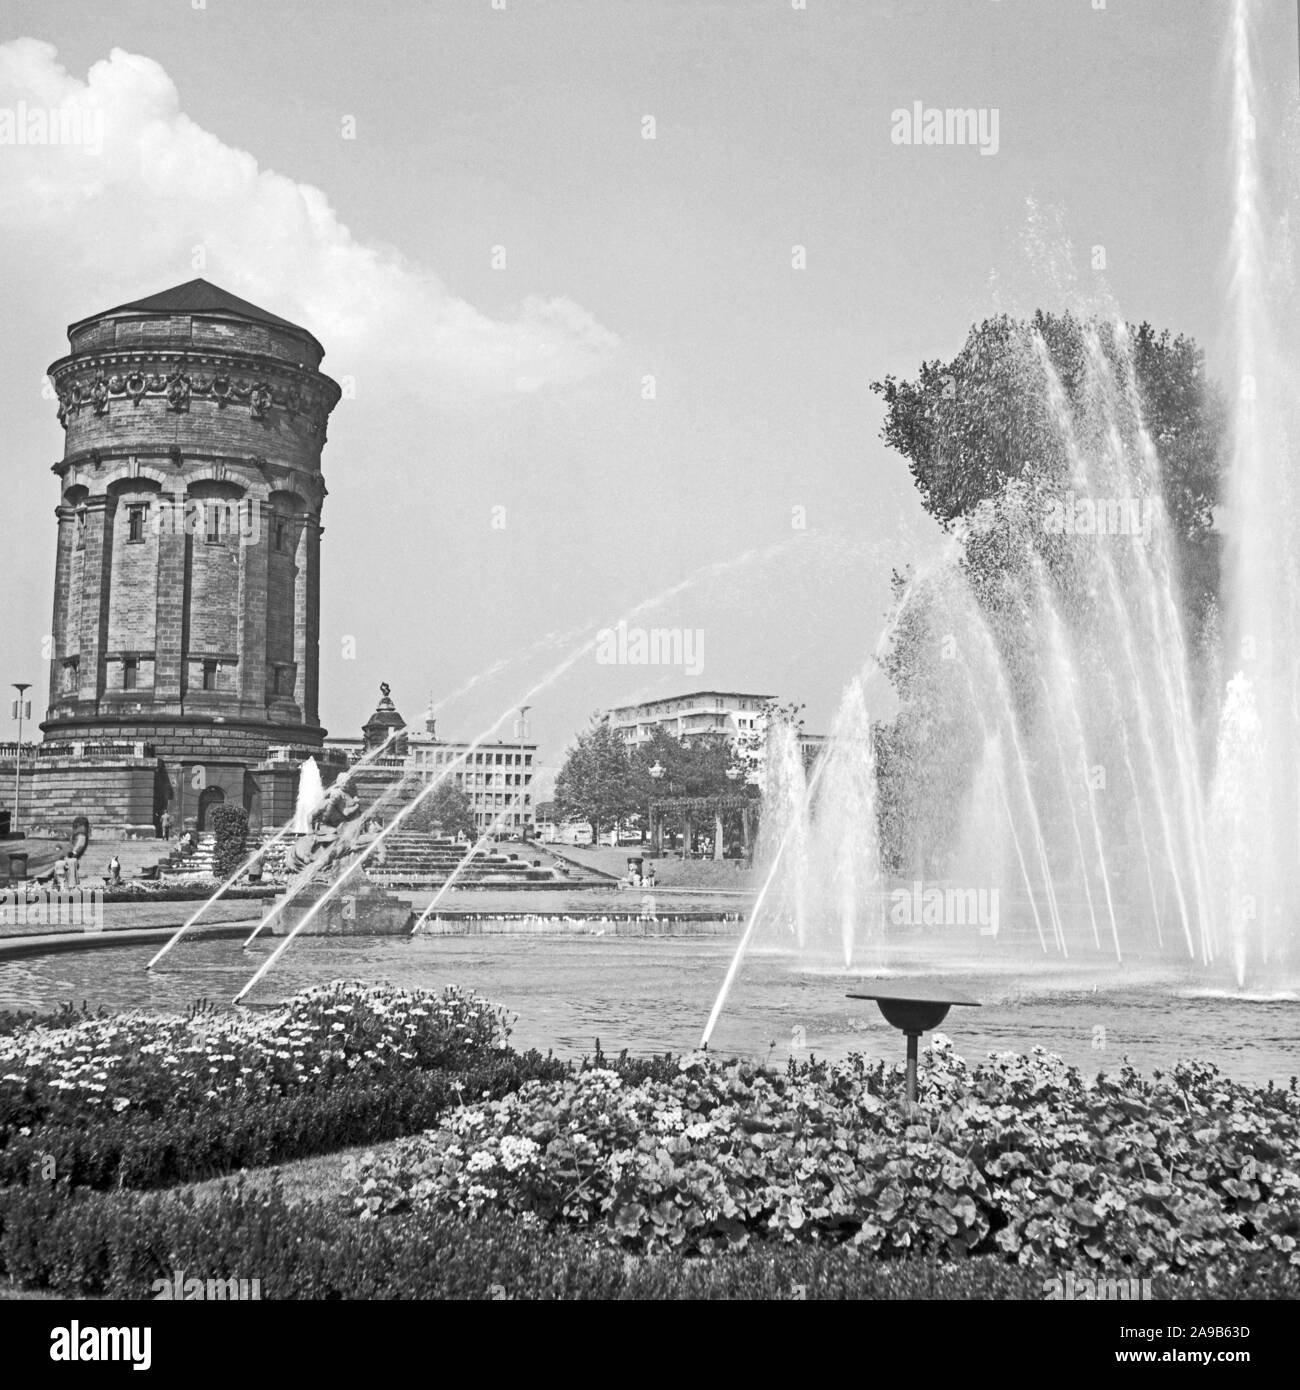 Mannheim Water Tower, Allemagne 1957 Banque D'Images